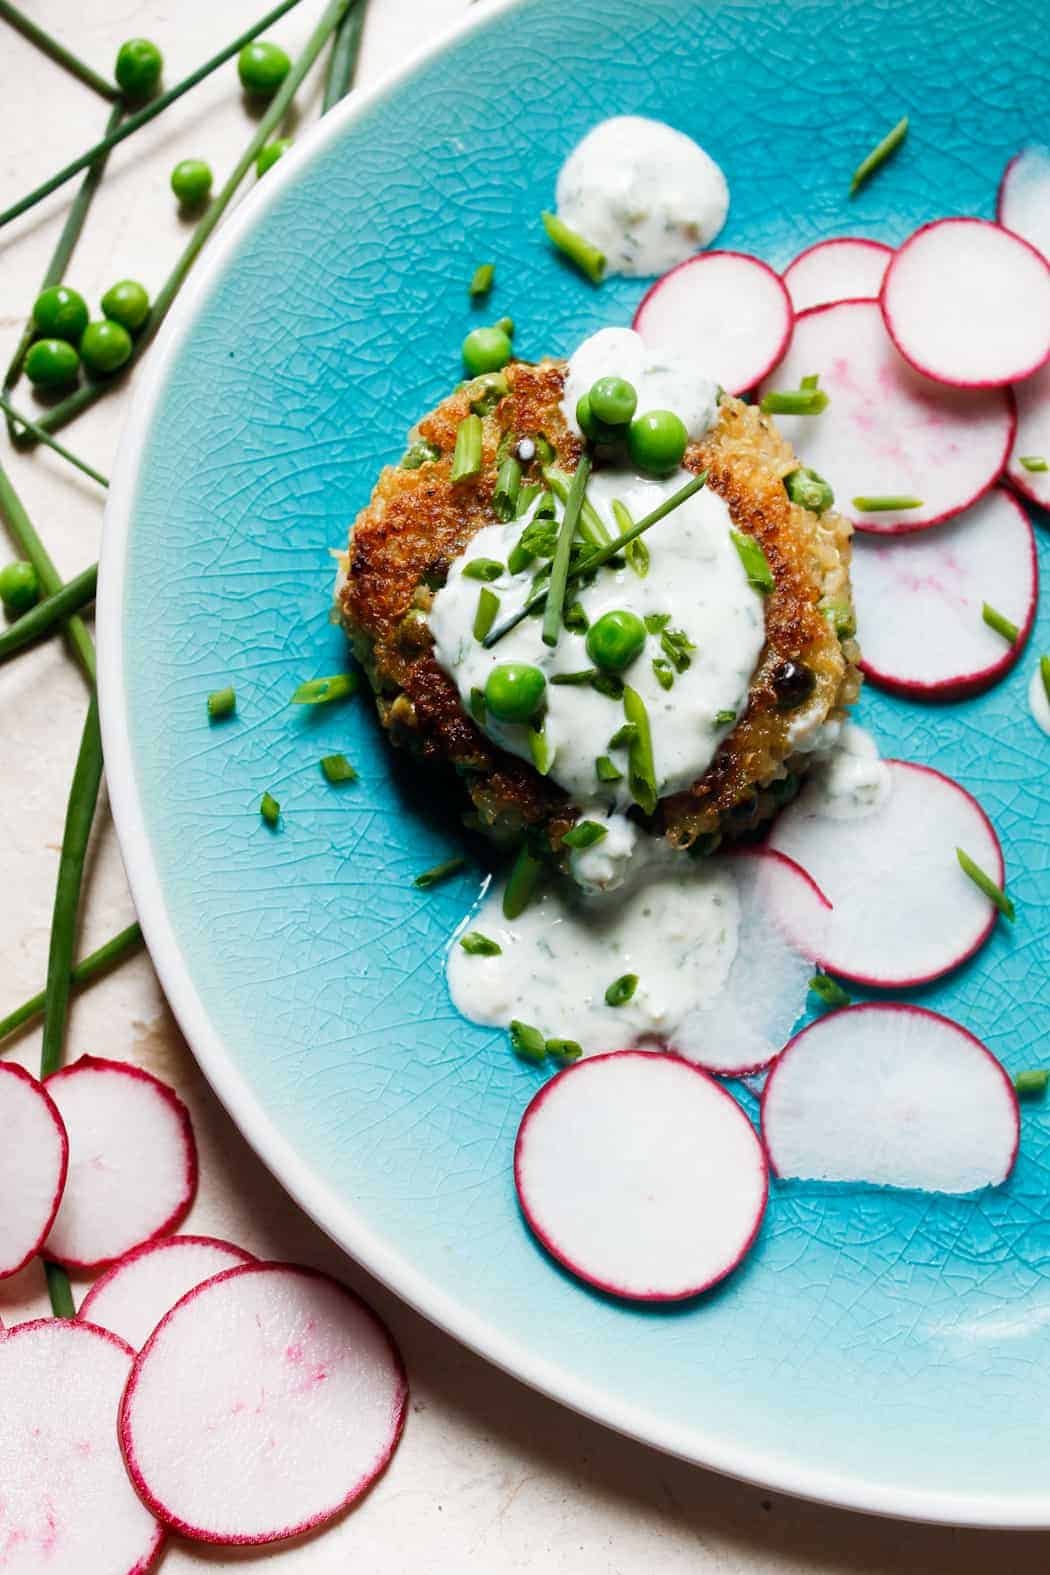 At the Immigrant's Table: Quinoa fritters with peas and feta